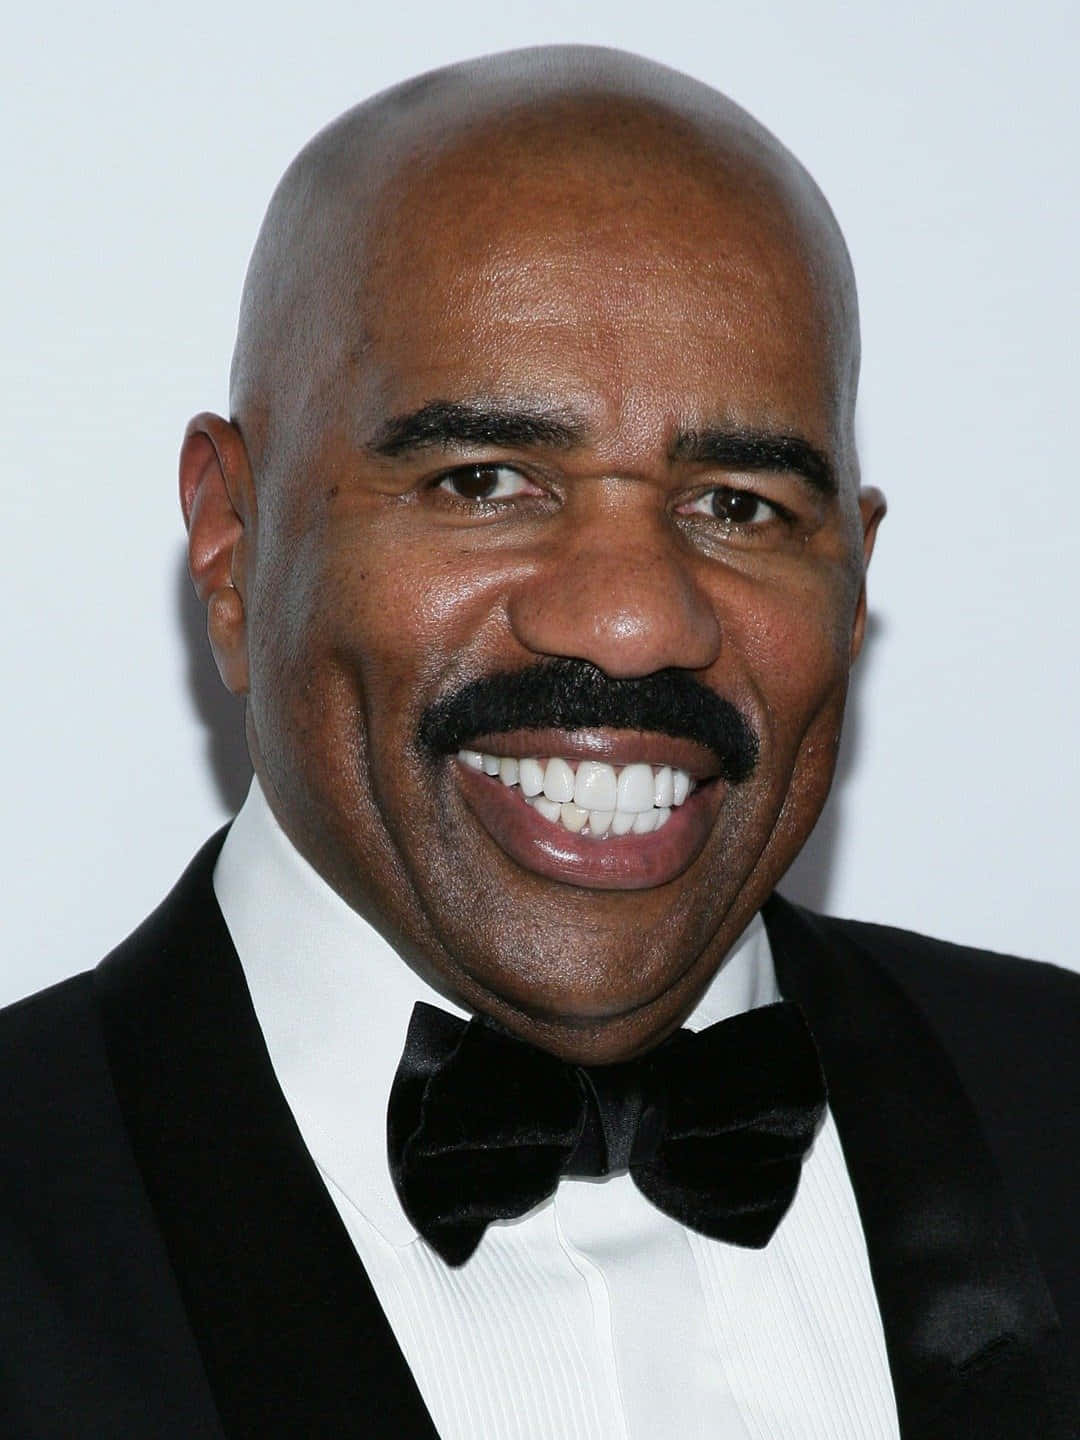 Renowned Television Personality, Steve Harvey, Captured In A Joyous Moment Wallpaper